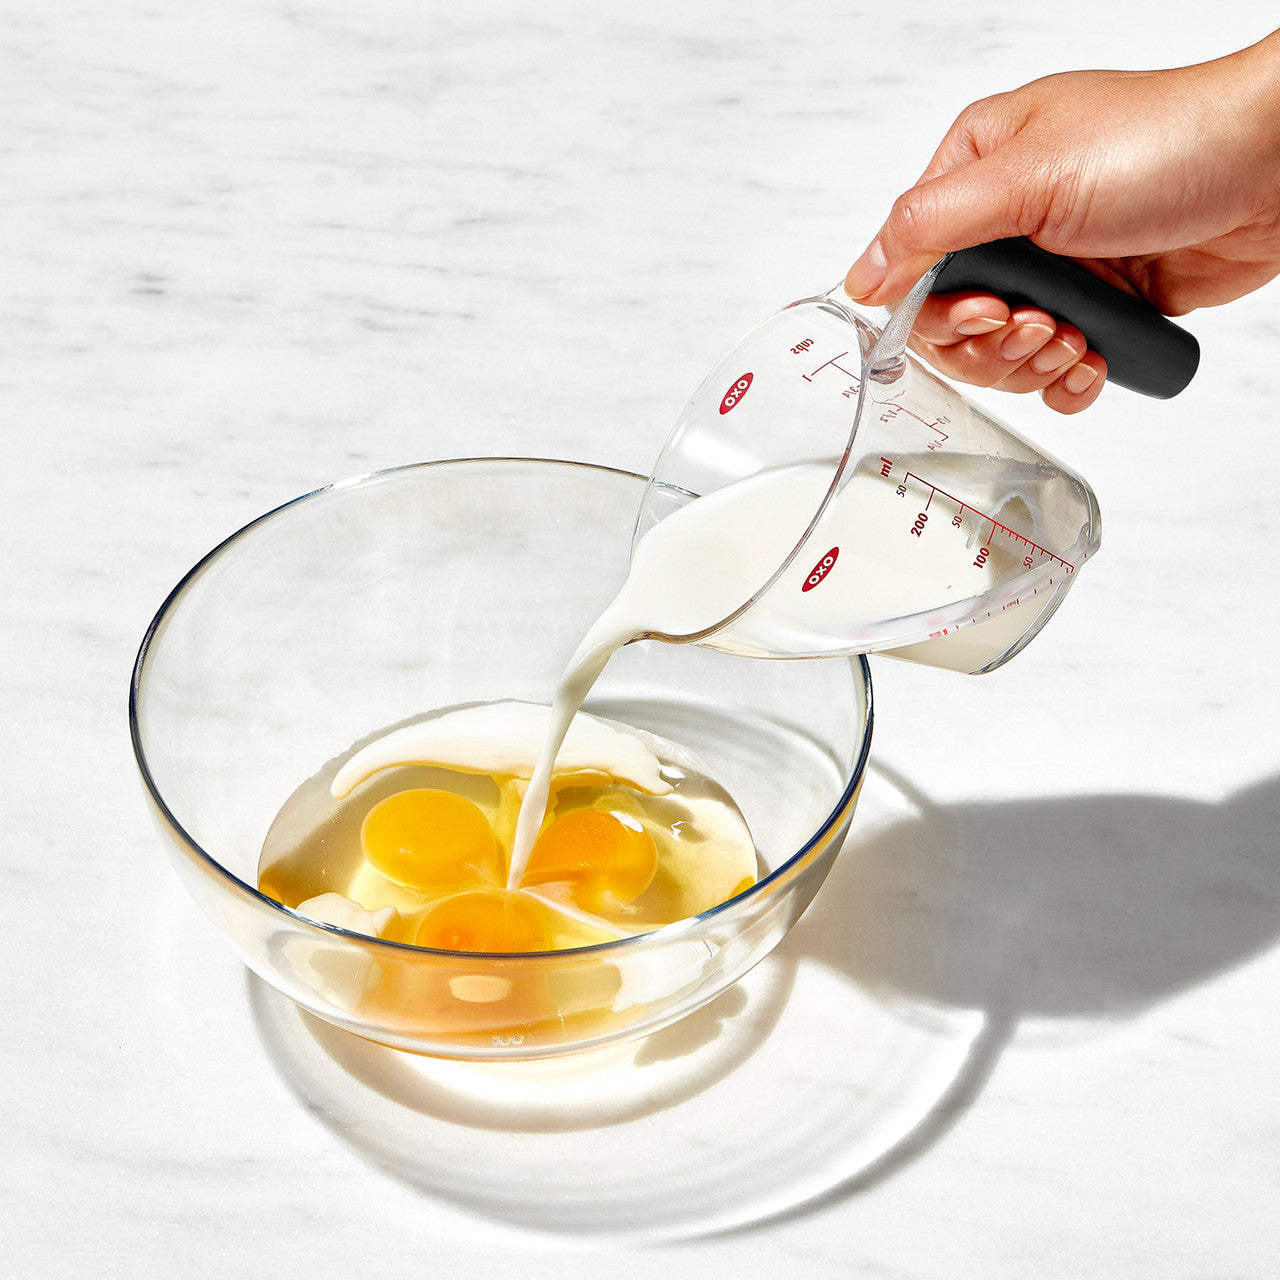 OXO Good Grips Angled Measuring Cup - 2 Cup/ 500ml